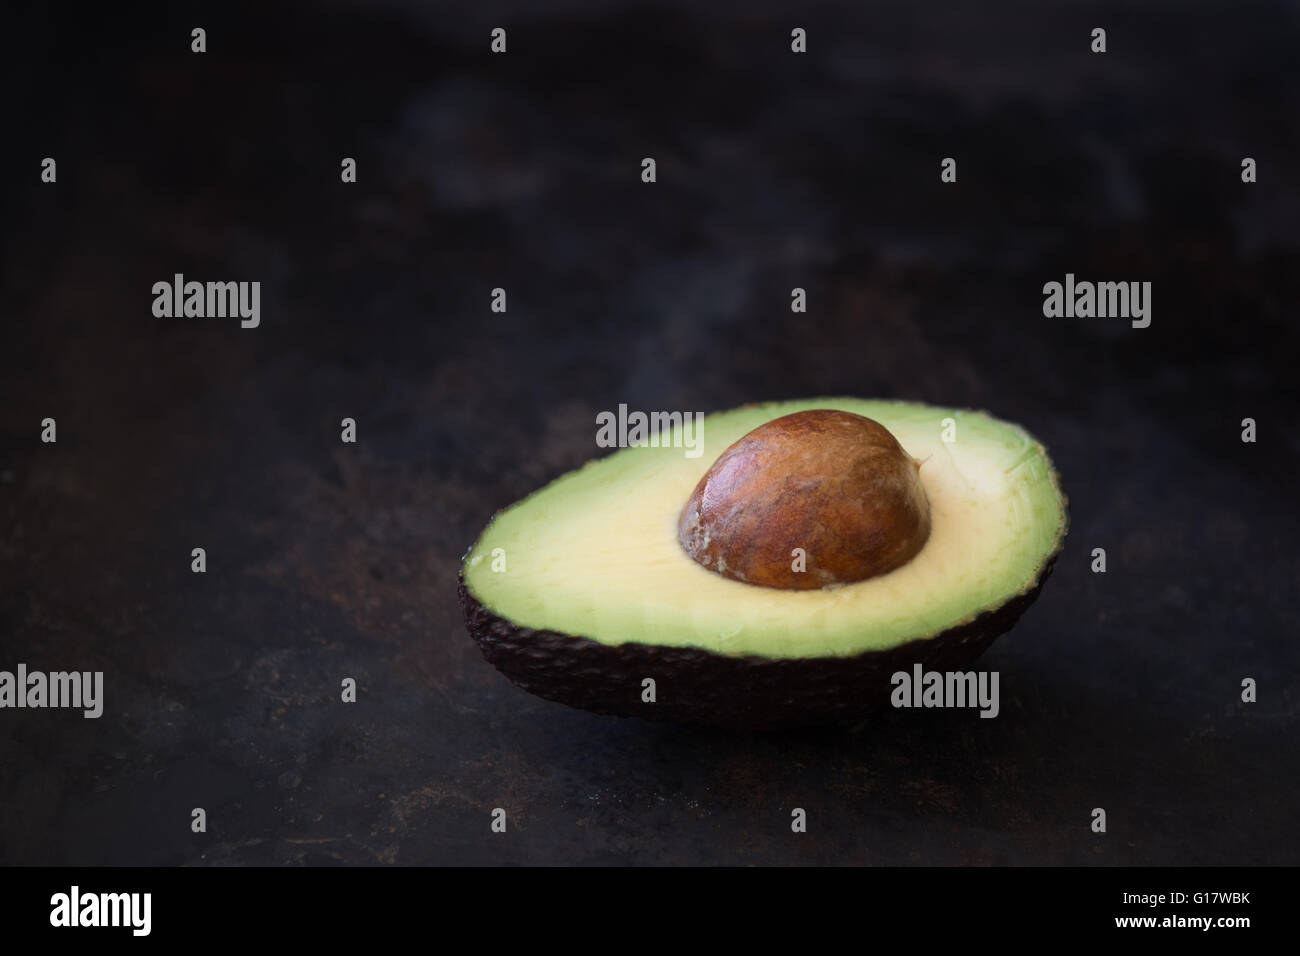 one half of a ripe avocado against a rustic dark background Stock Photo